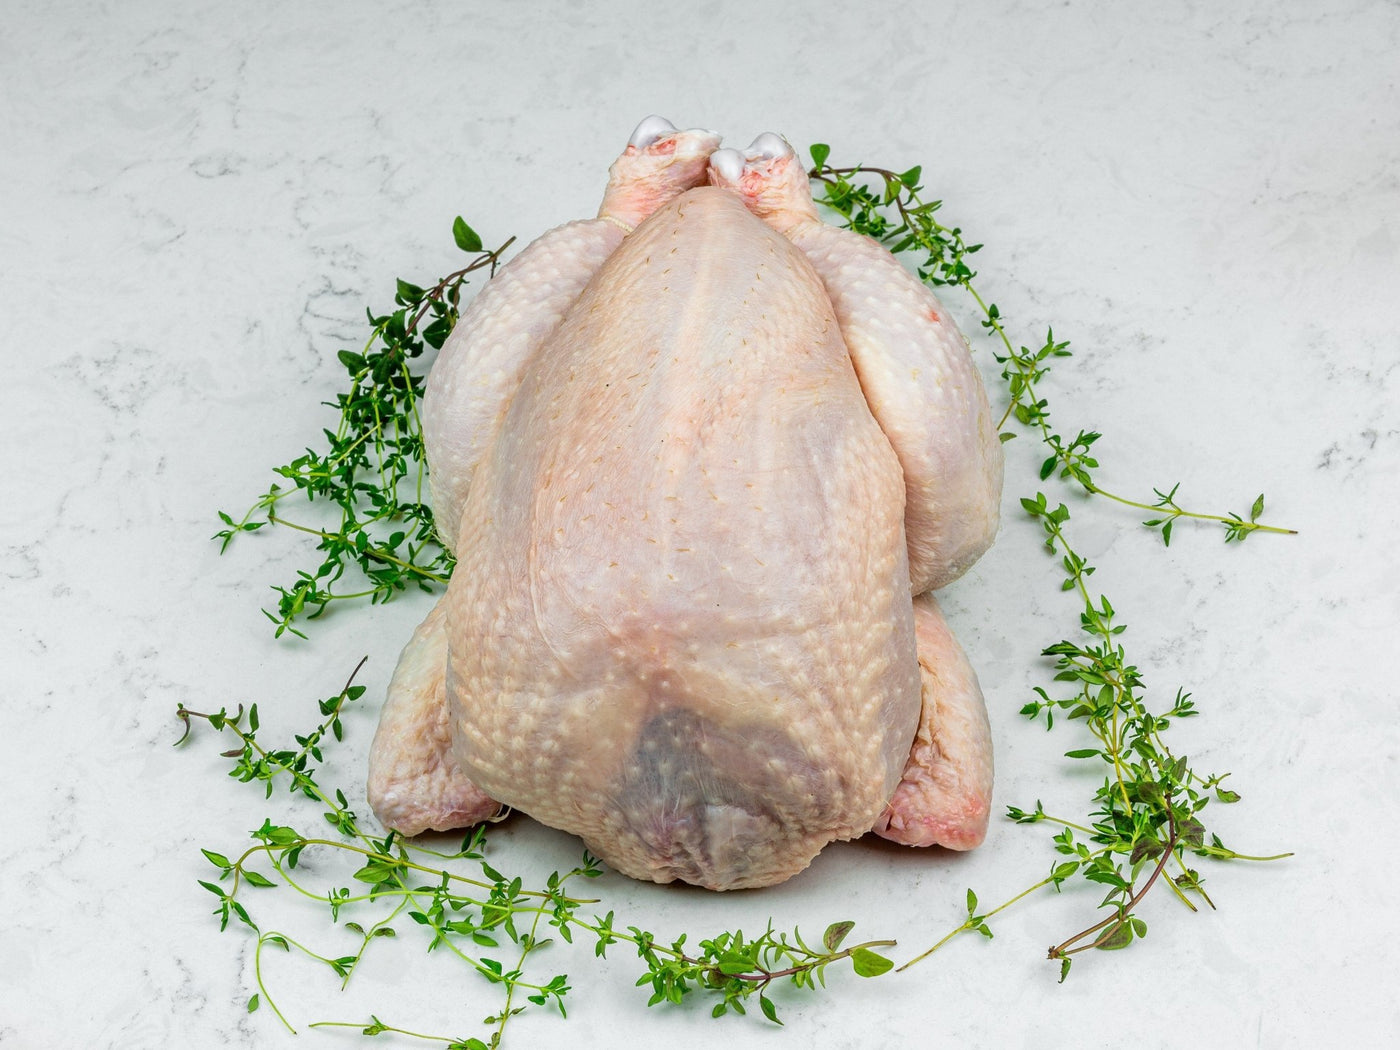 Whole Free Range Herb Fed Chicken - Chicken - Thomas Joseph Butchery - Ethical Dry-Aged Meat The Best Steak UK Thomas Joseph Butchery